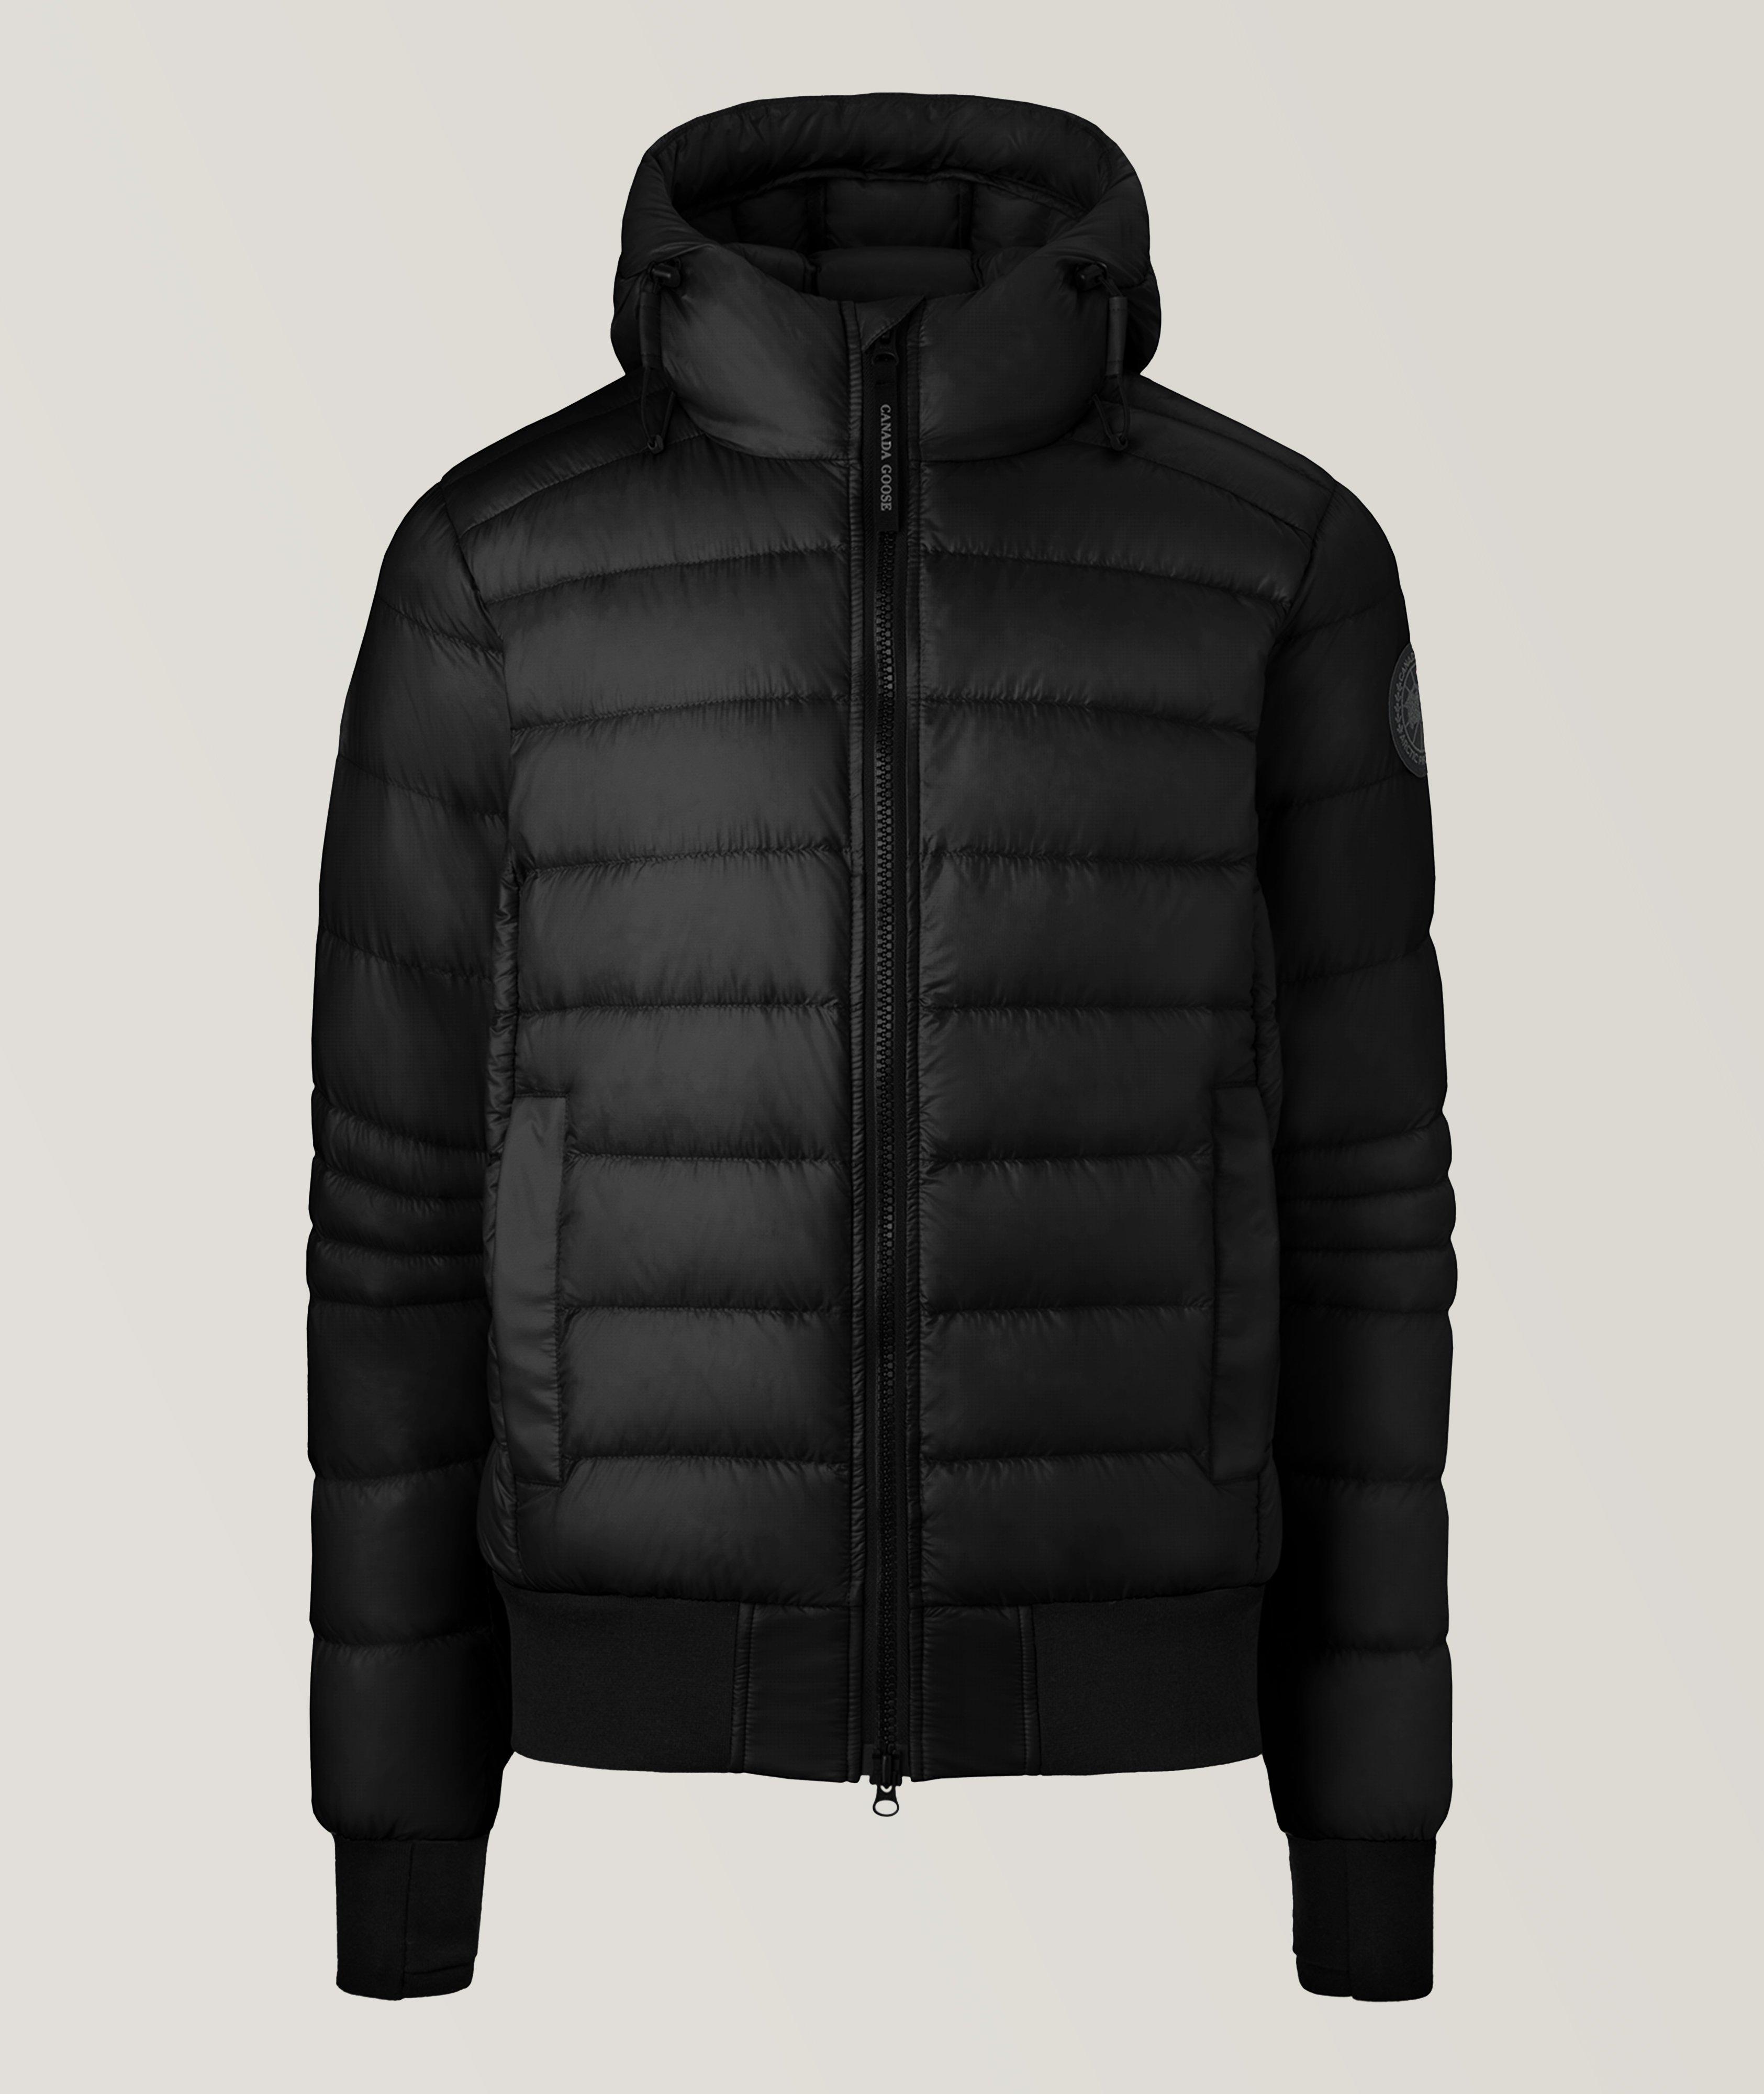 Crofton Quilted Down Jacket image 0